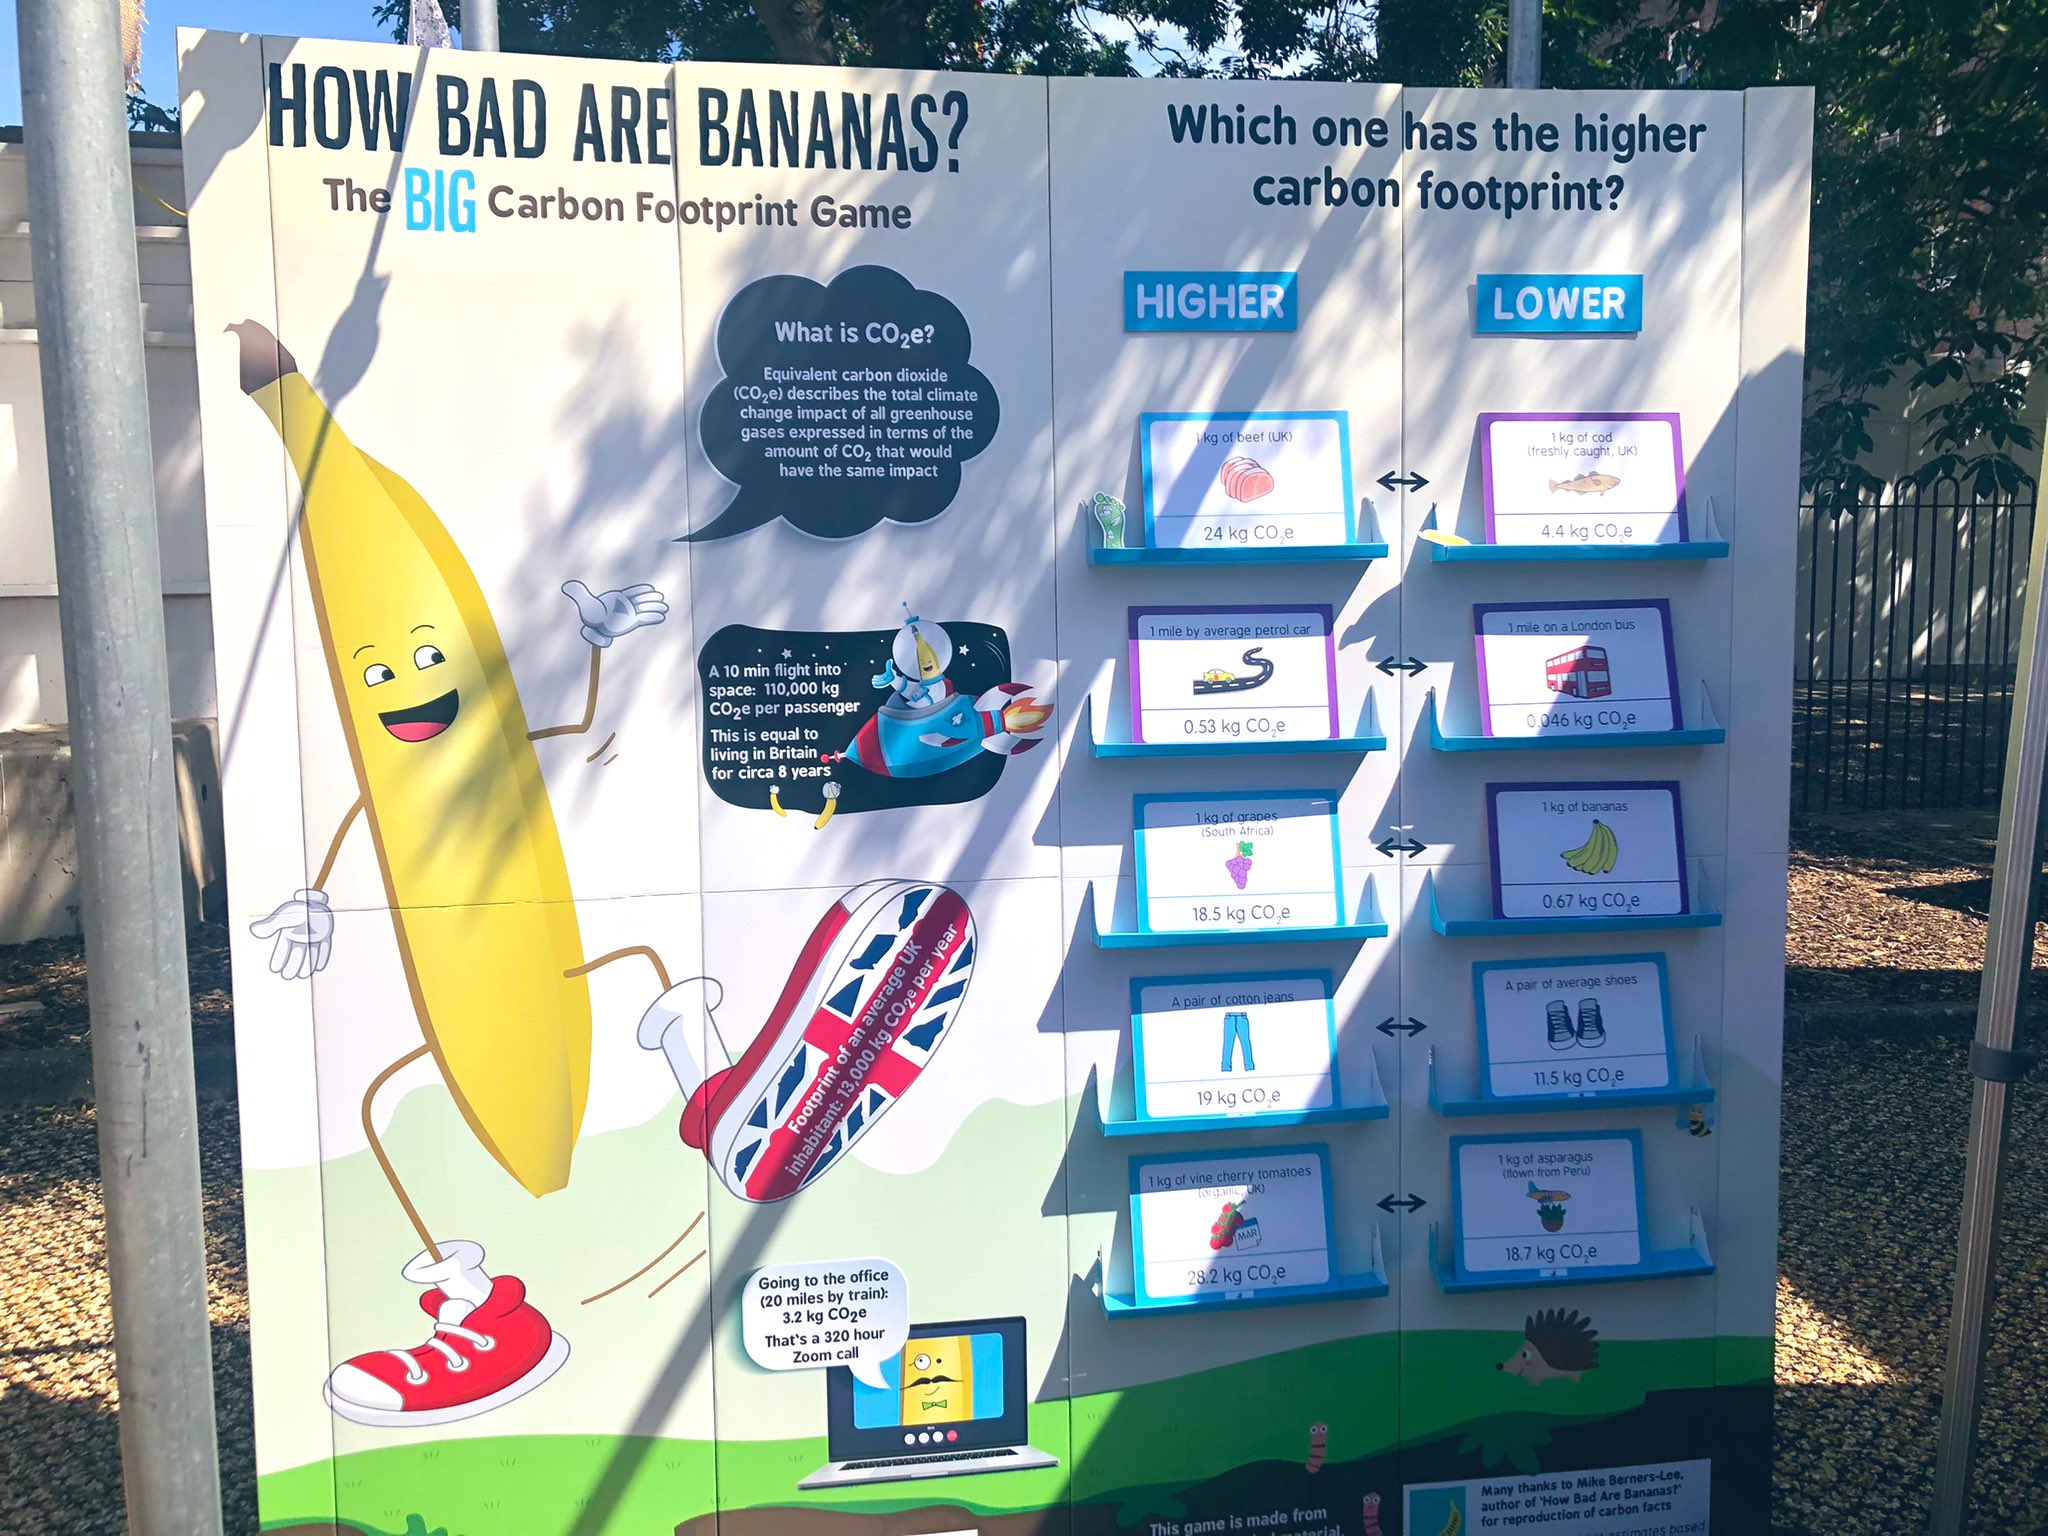 How Bad Are Bananas - The Big Carbon Footprint Game - How Bad are